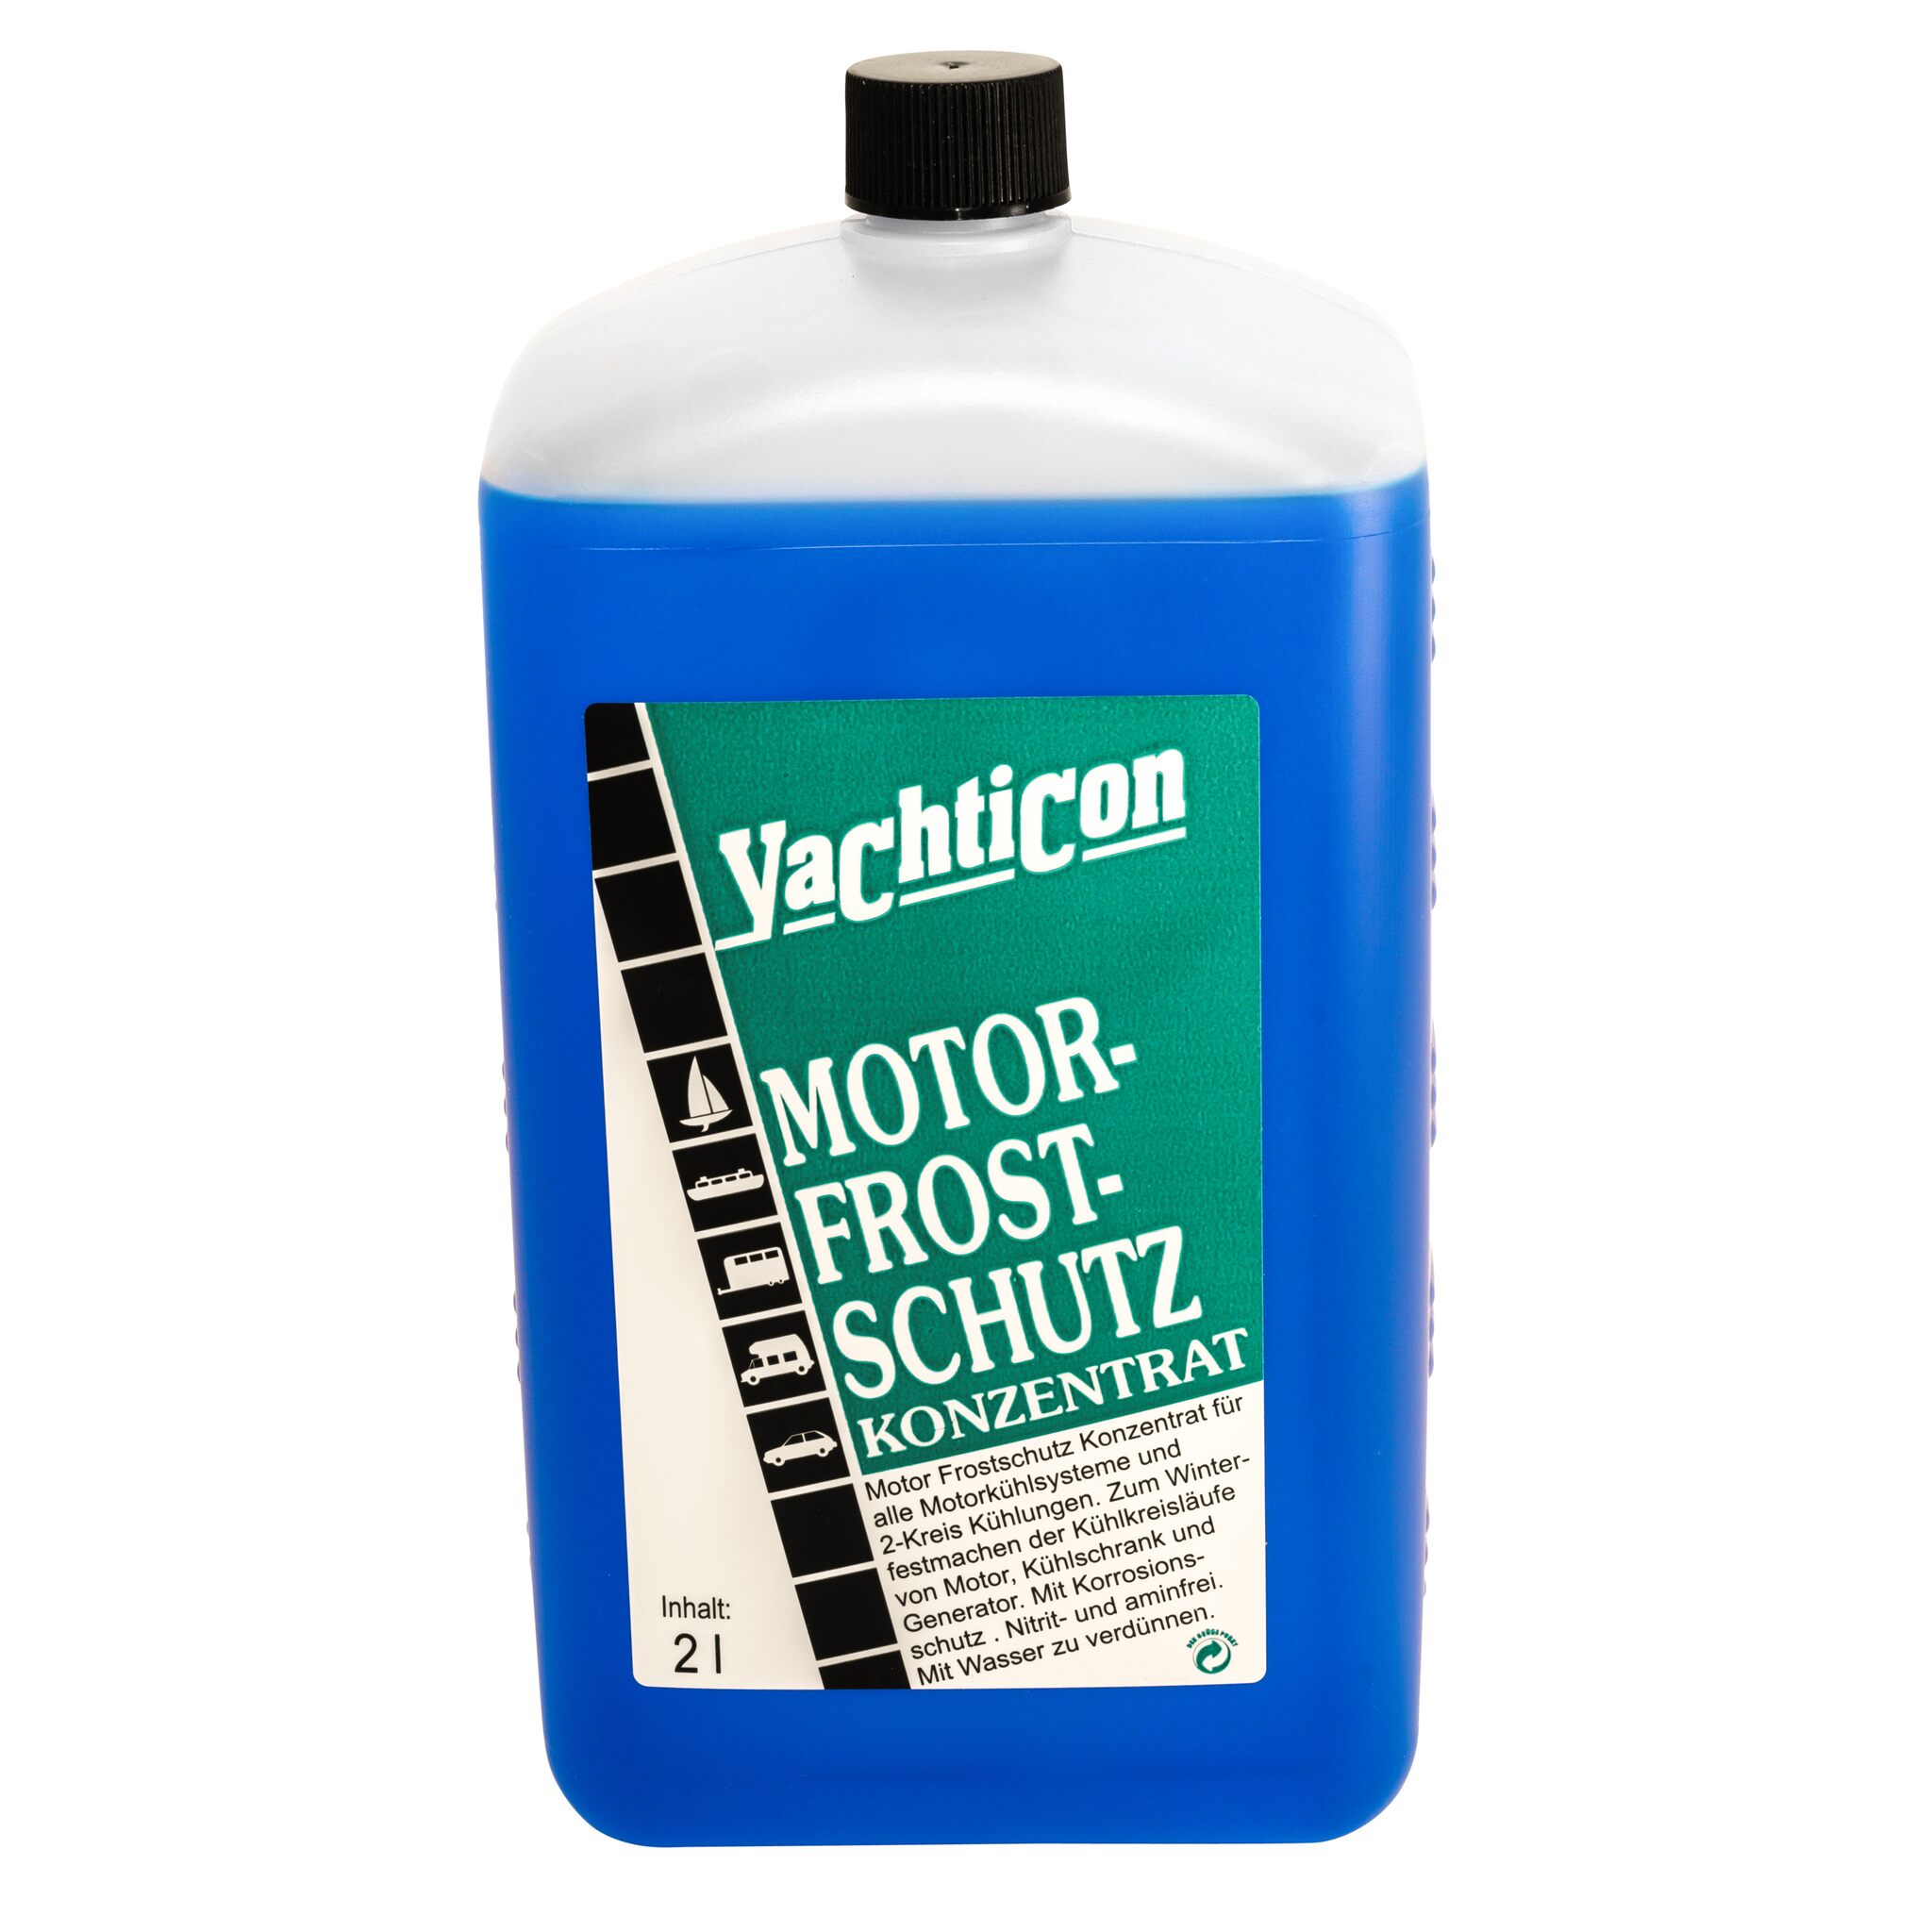 Yachticon engine antifreeze concentrate